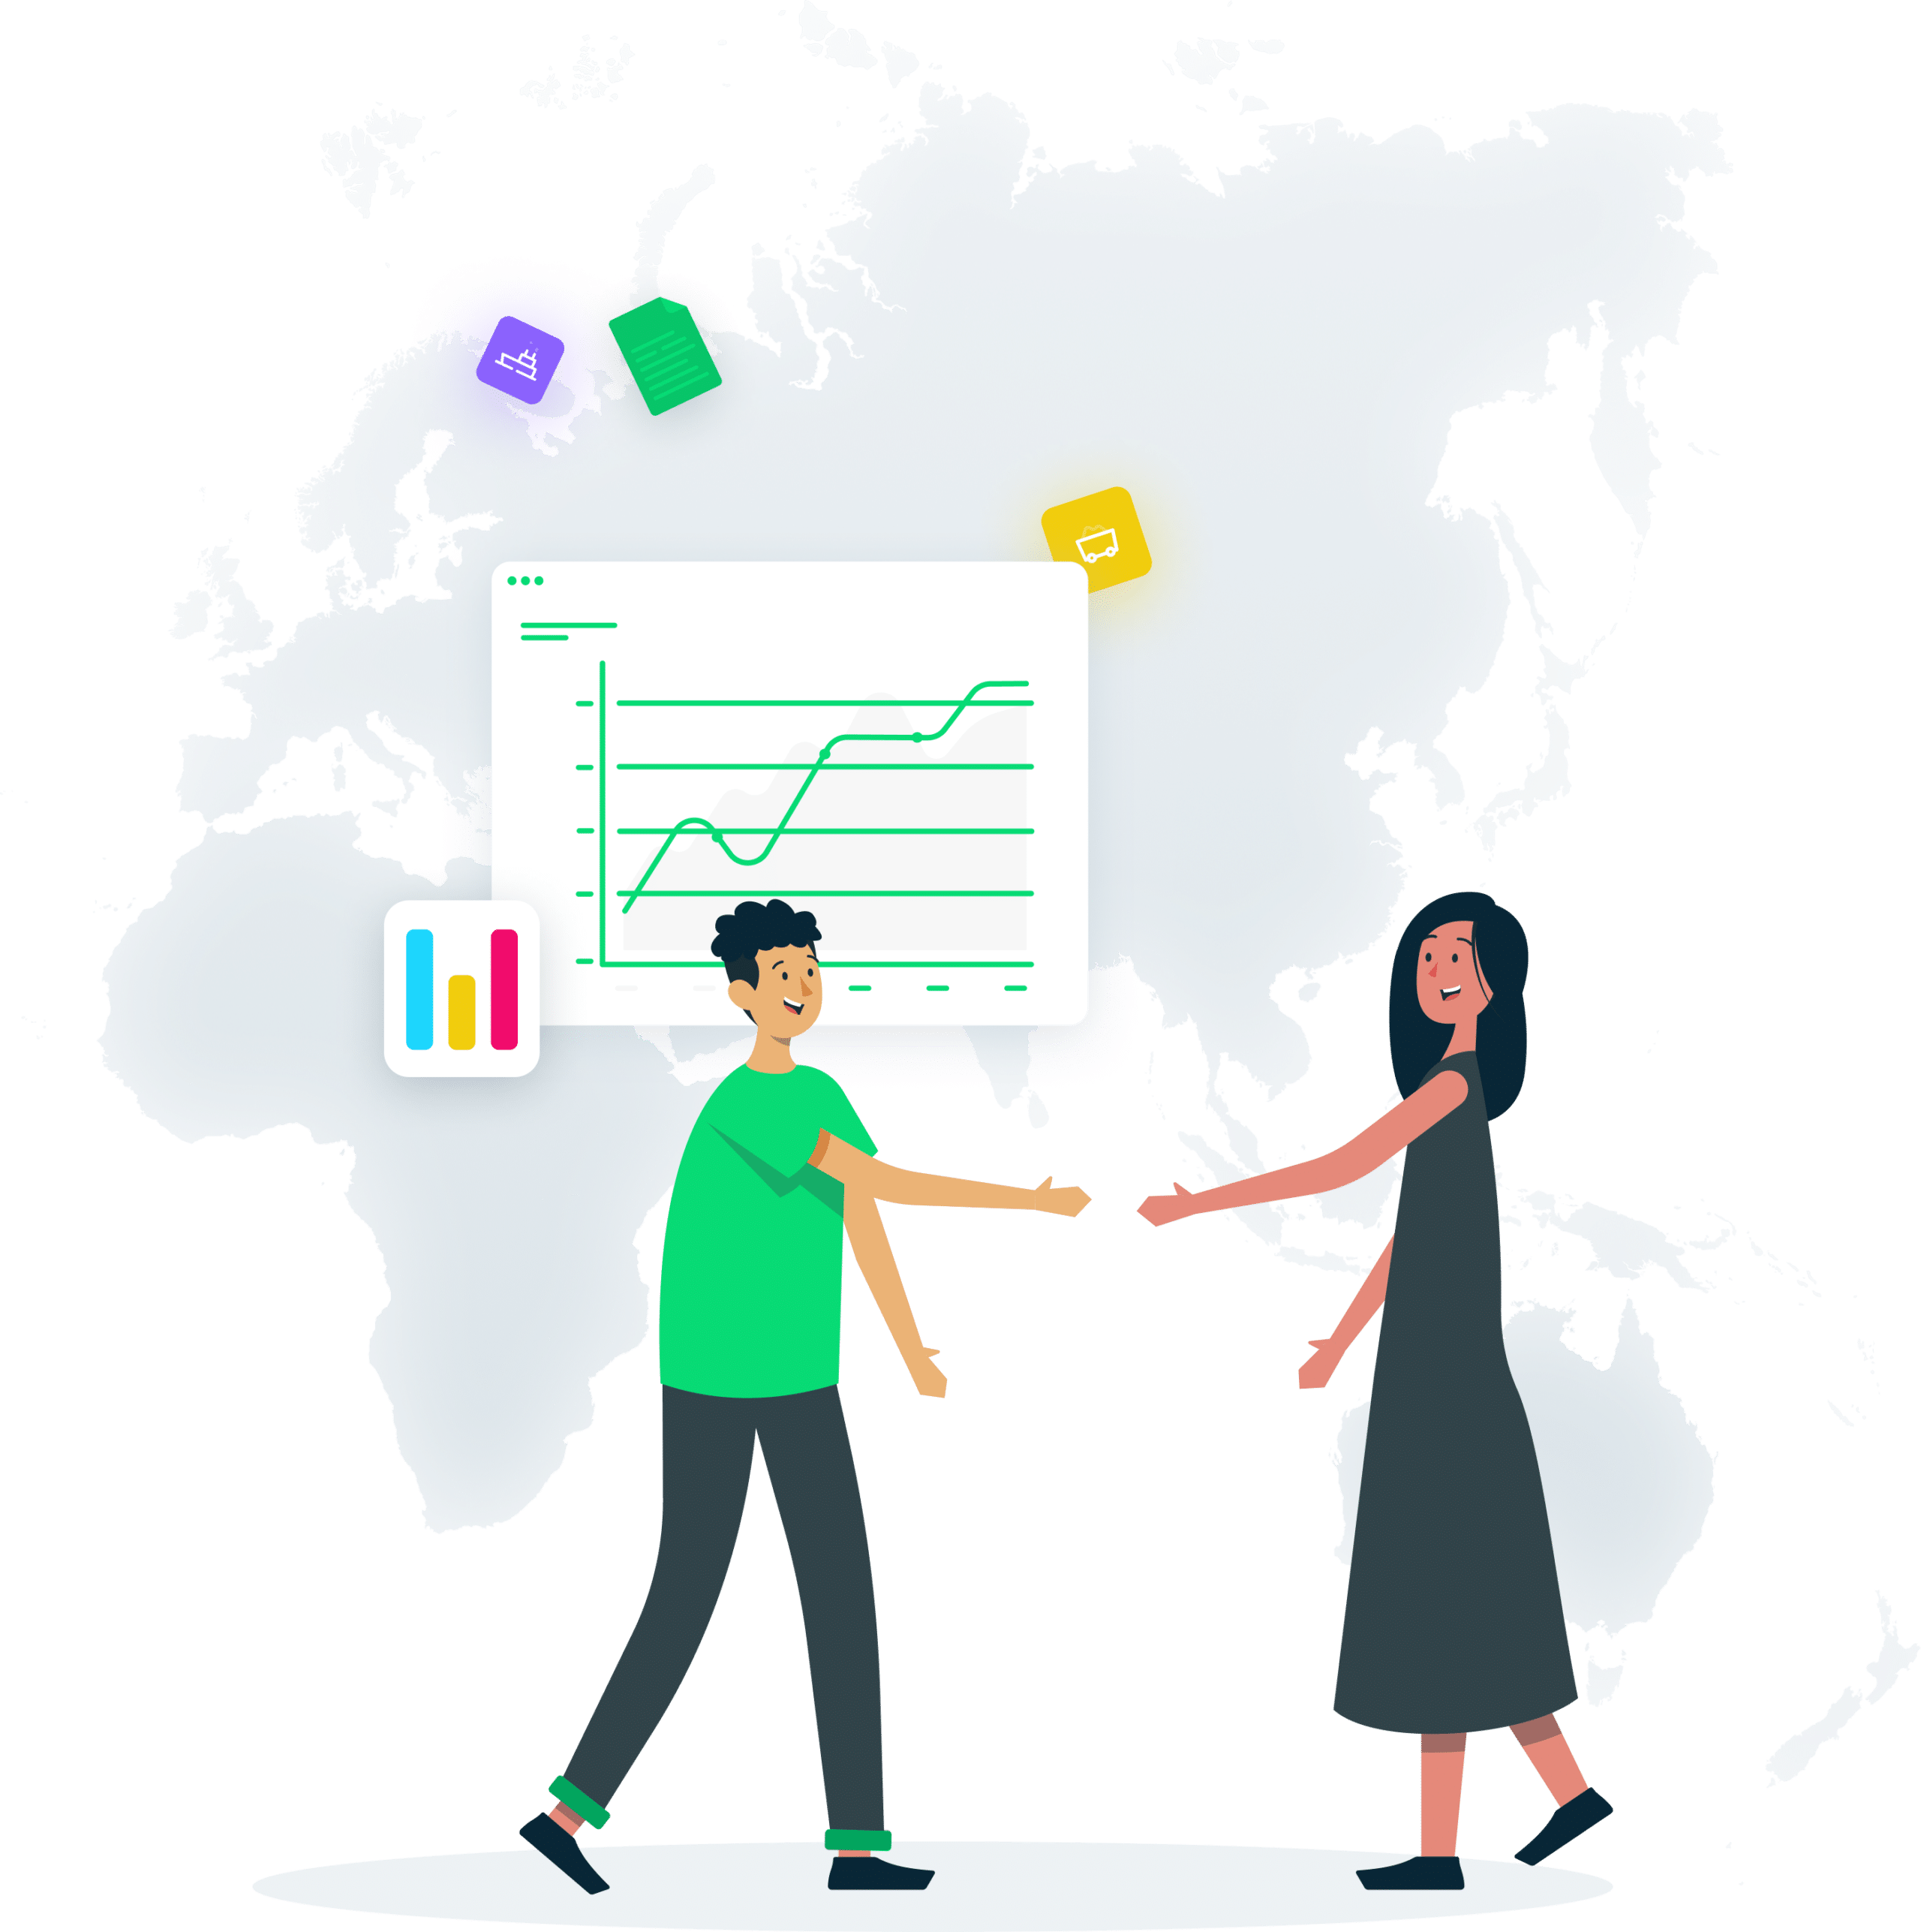 Women and man shaking hands with graph and world map behind them showing a partnership.